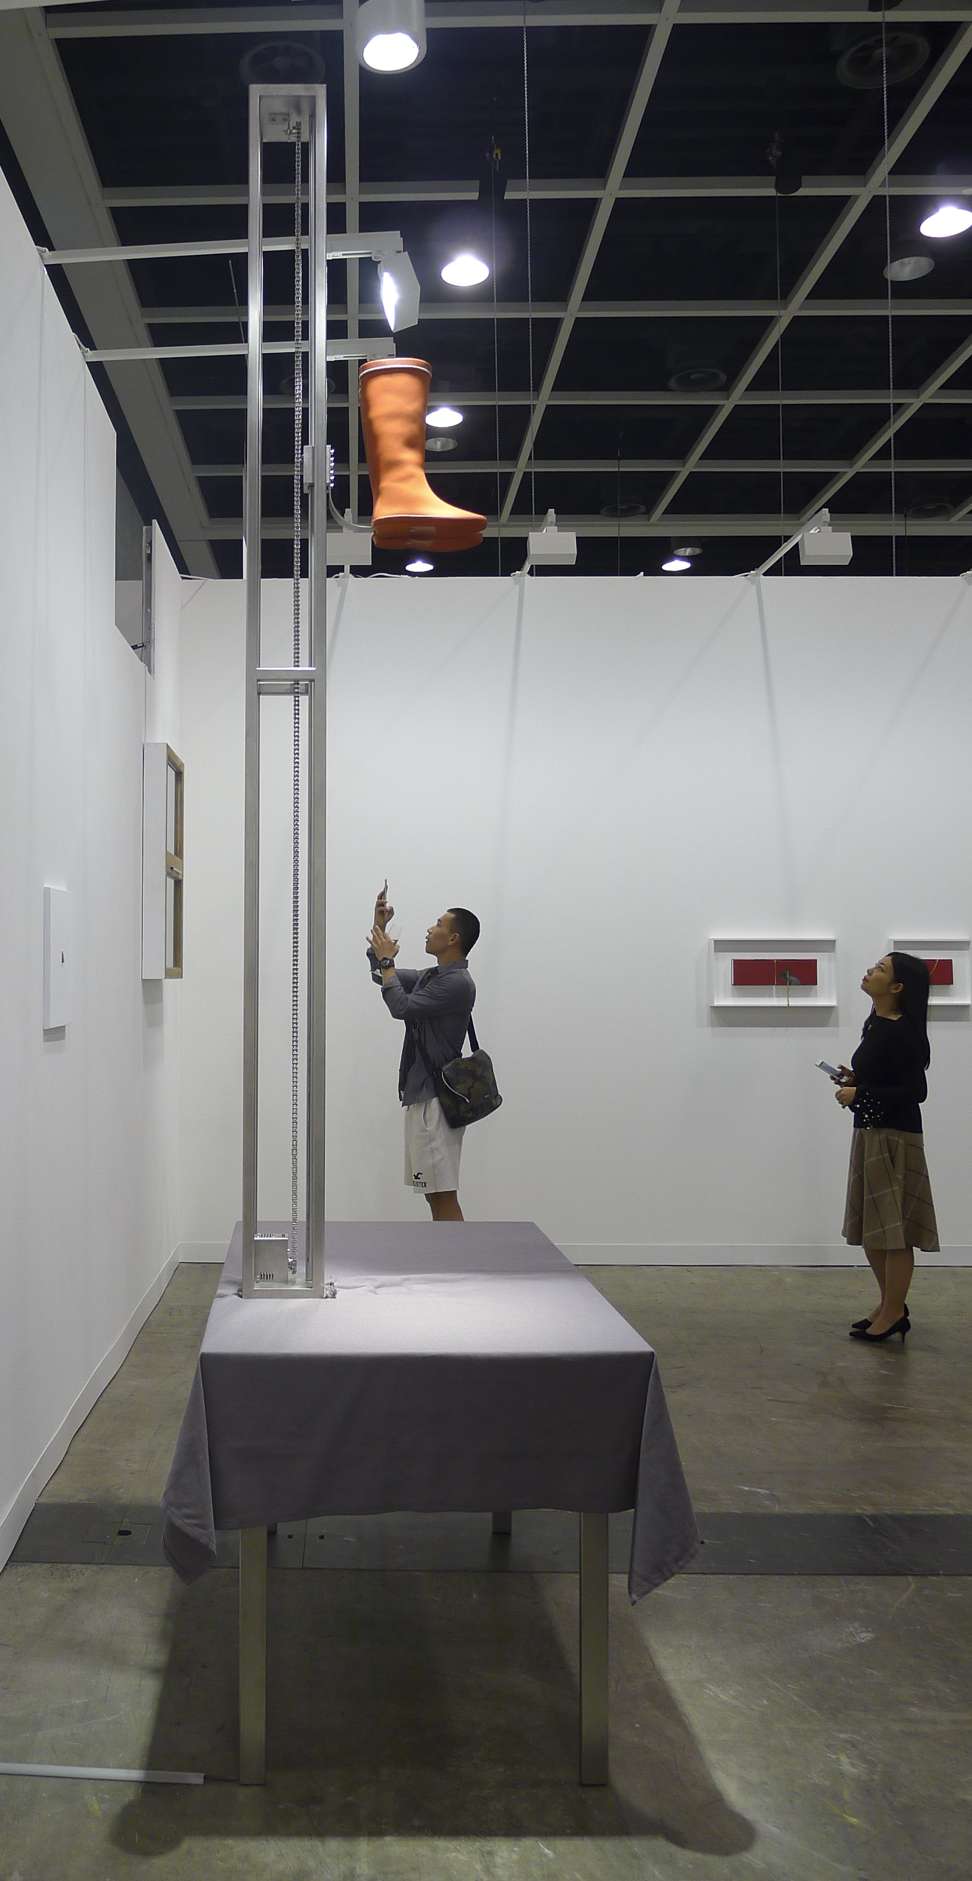 Kinetic installation Pull Me Up Softly by Joyce Ho propels a pair of red boots upward, then lets them free-fall and disappear from view when observed from afar. Photo: John Batten